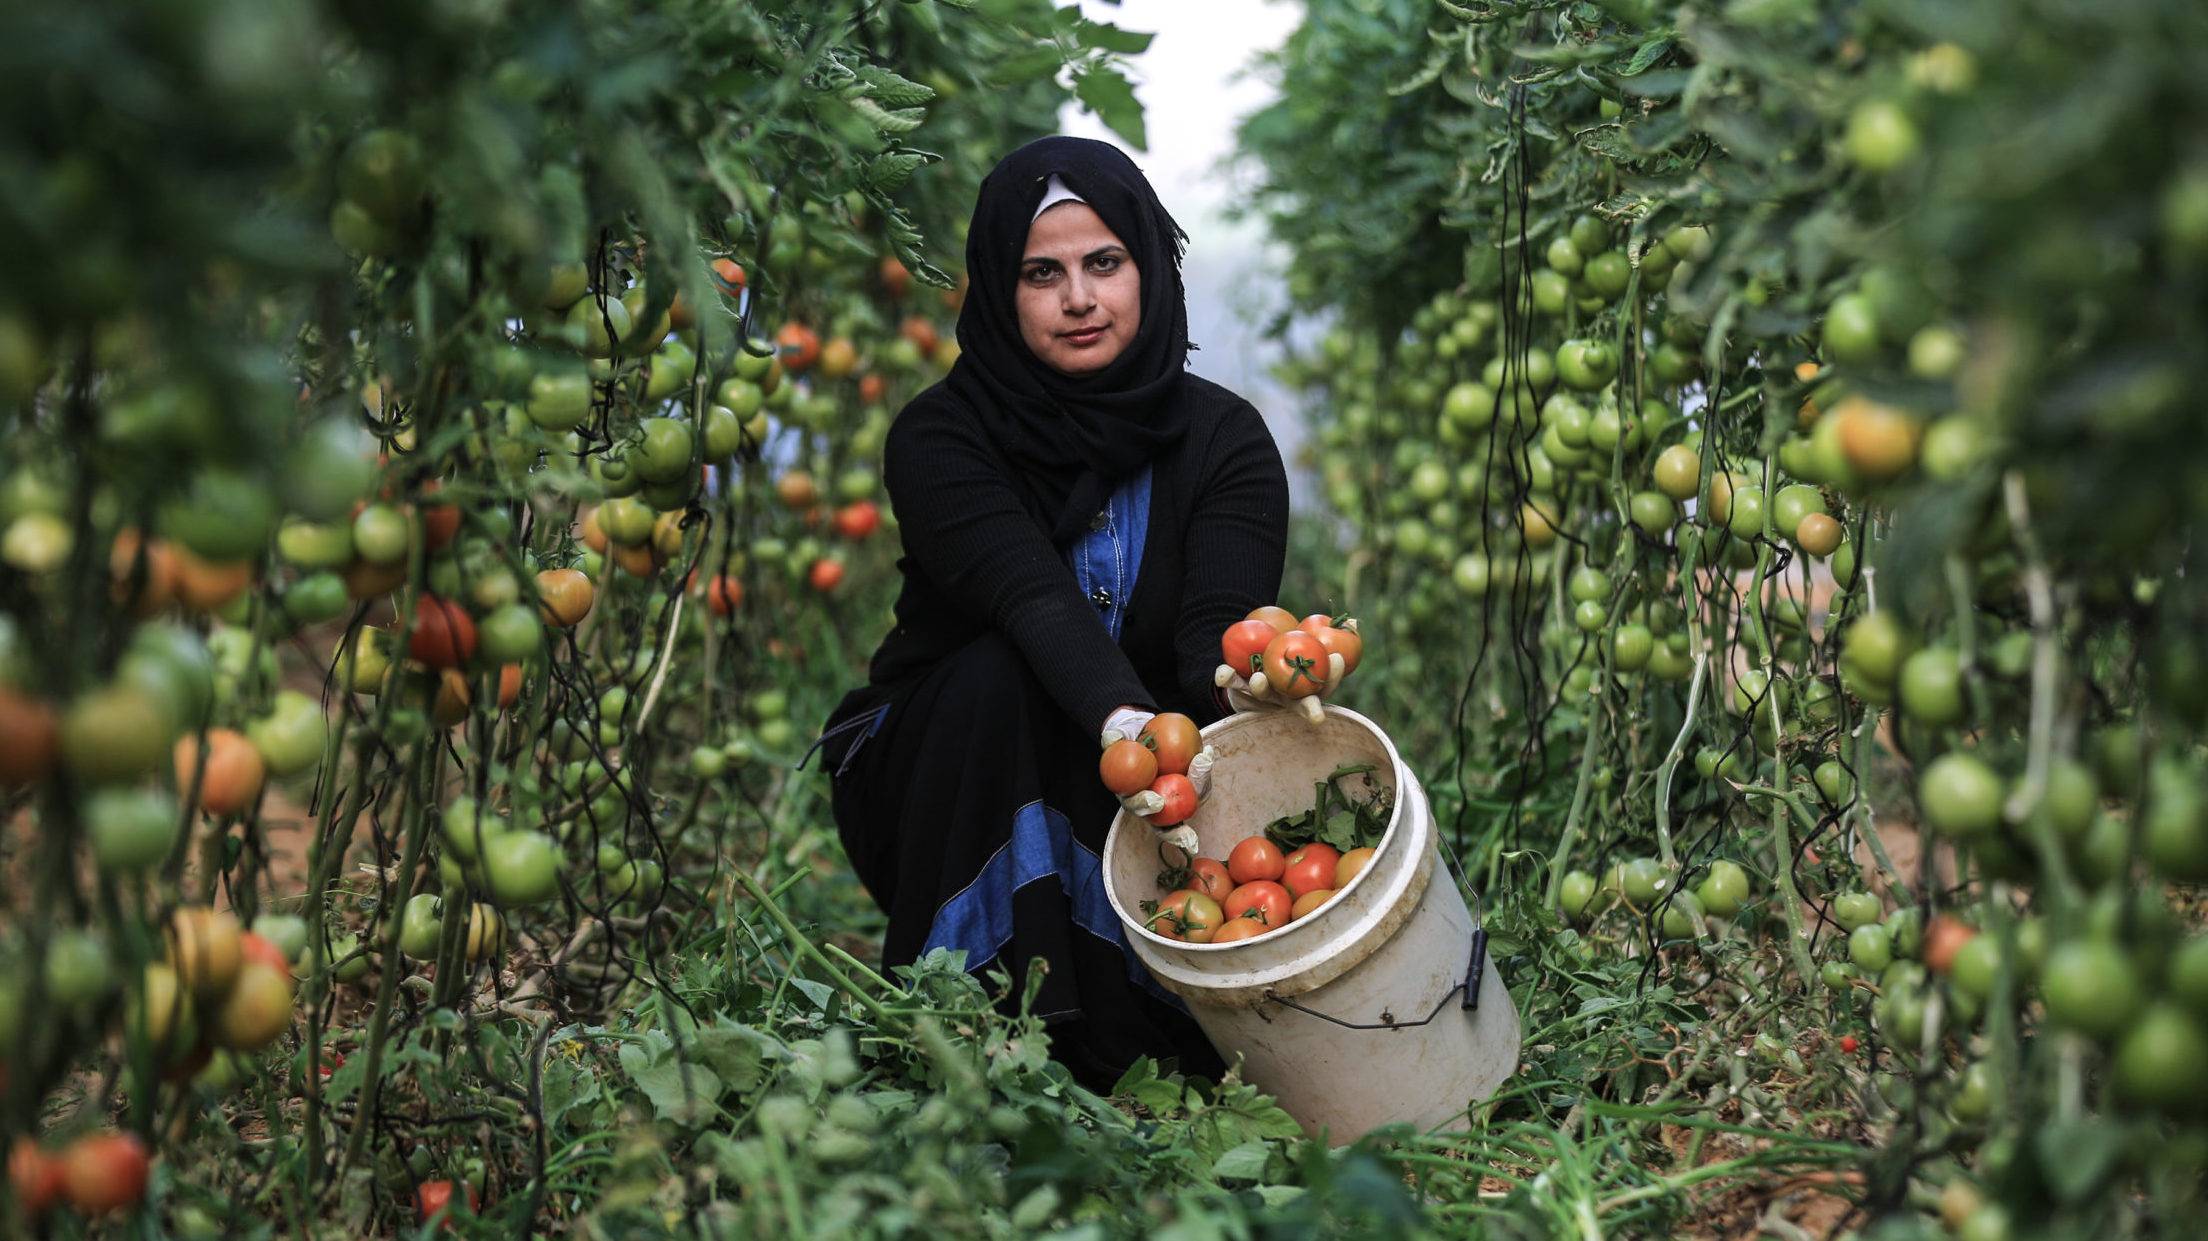 Traditional Values Make it Difficult for Palestinian Women to Find Work